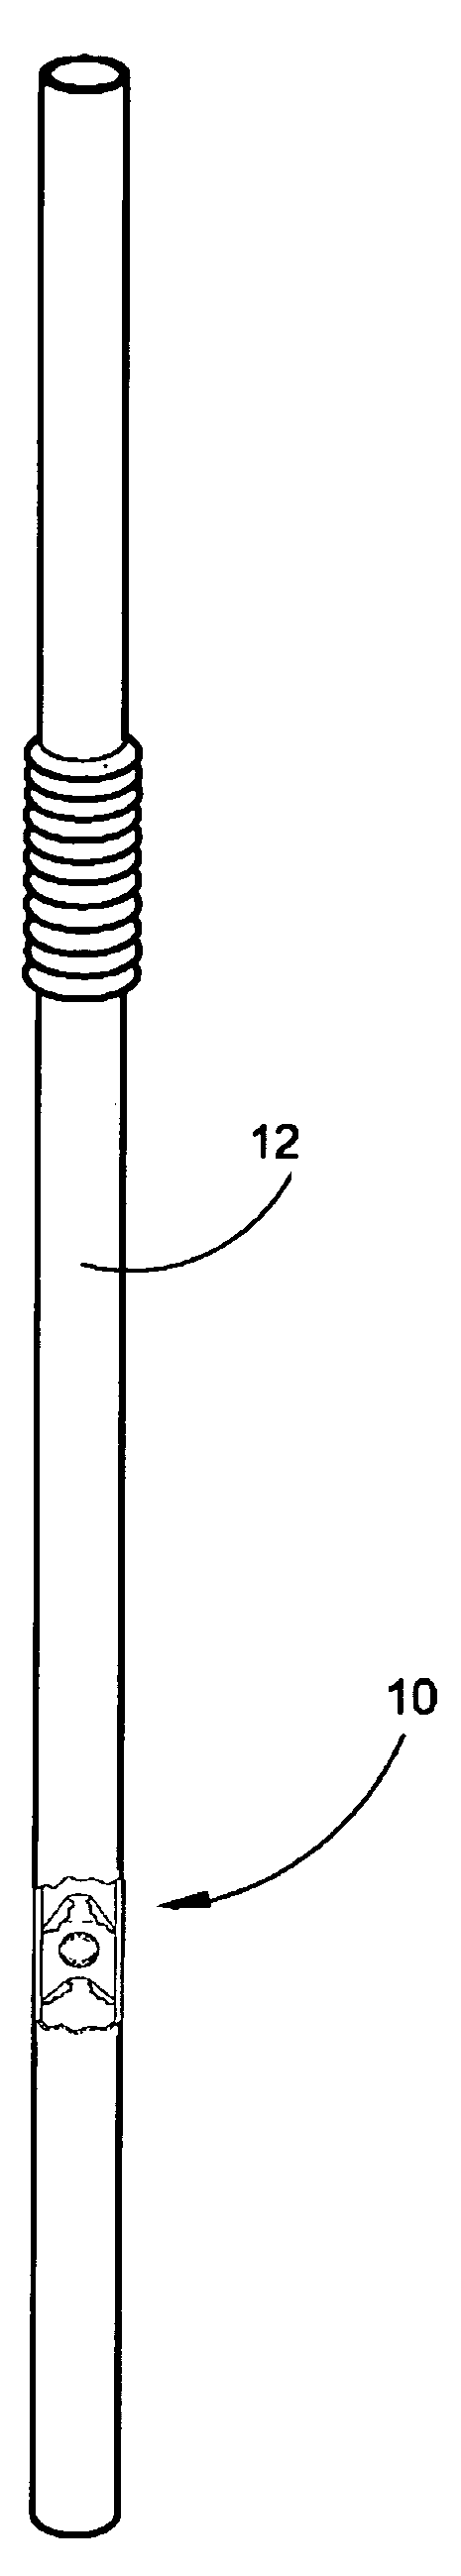 Apparatus and method for regulation of fluid flow from a straw